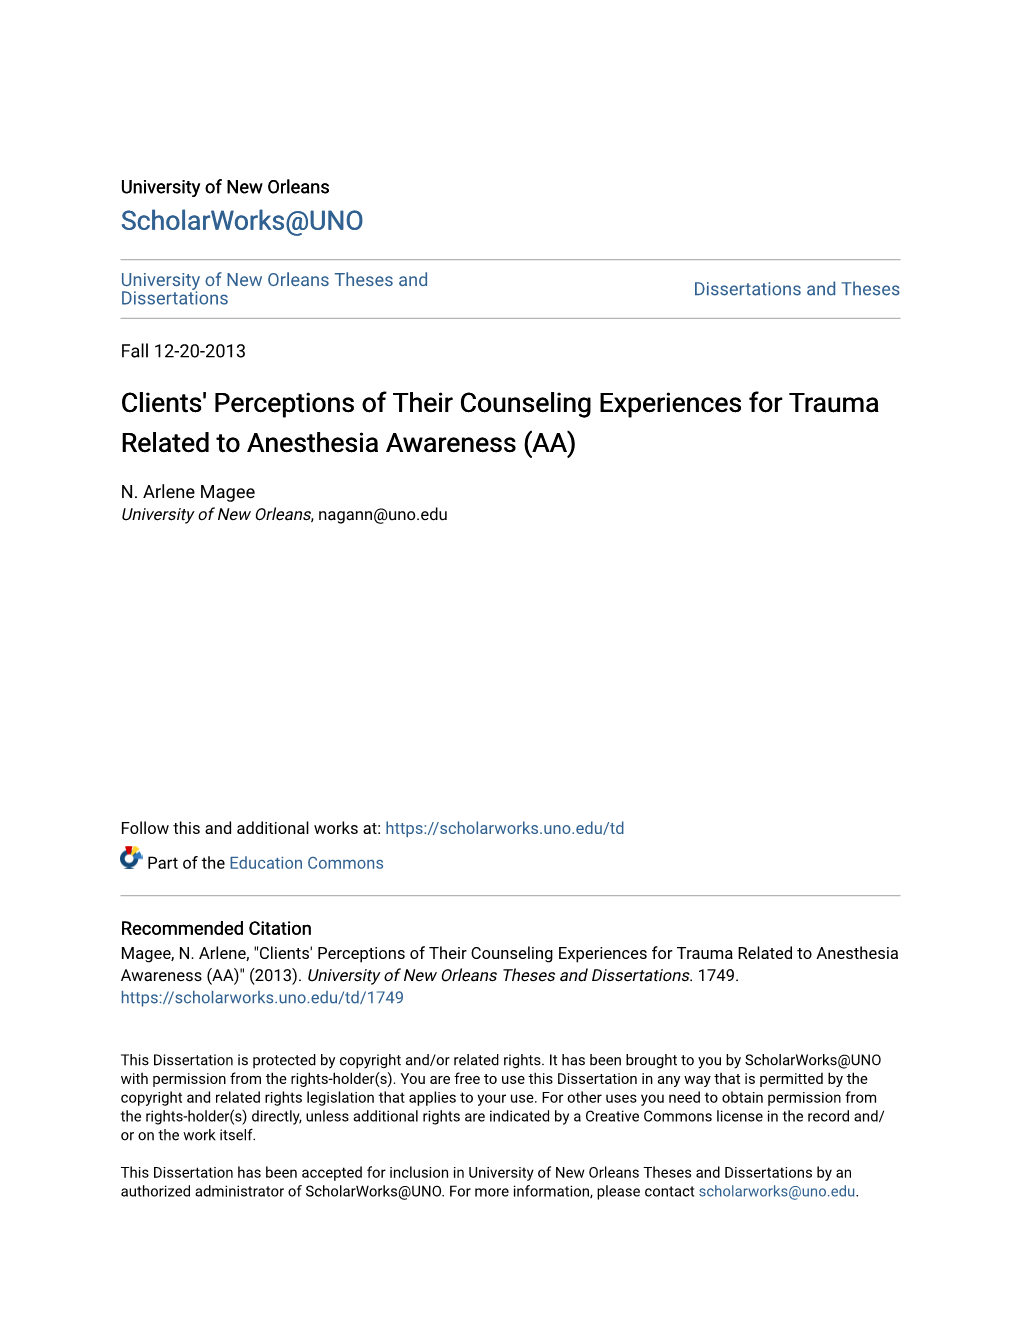 Clients' Perceptions of Their Counseling Experiences for Trauma Related to Anesthesia Awareness (AA)